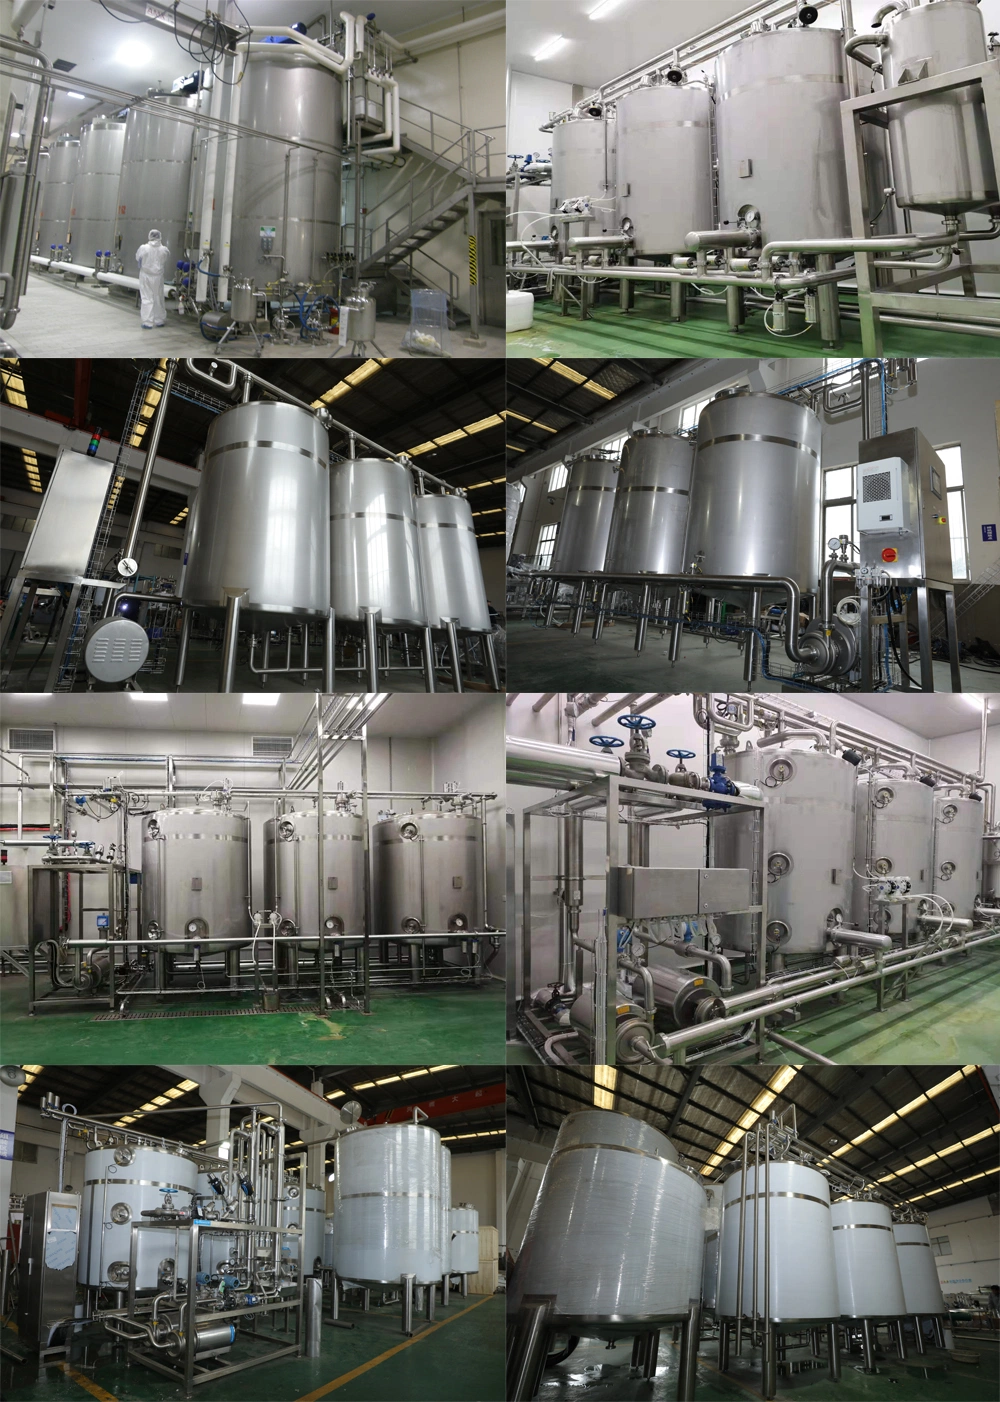 Food Grade Cleaning in Place Tanks for Beverage Plants